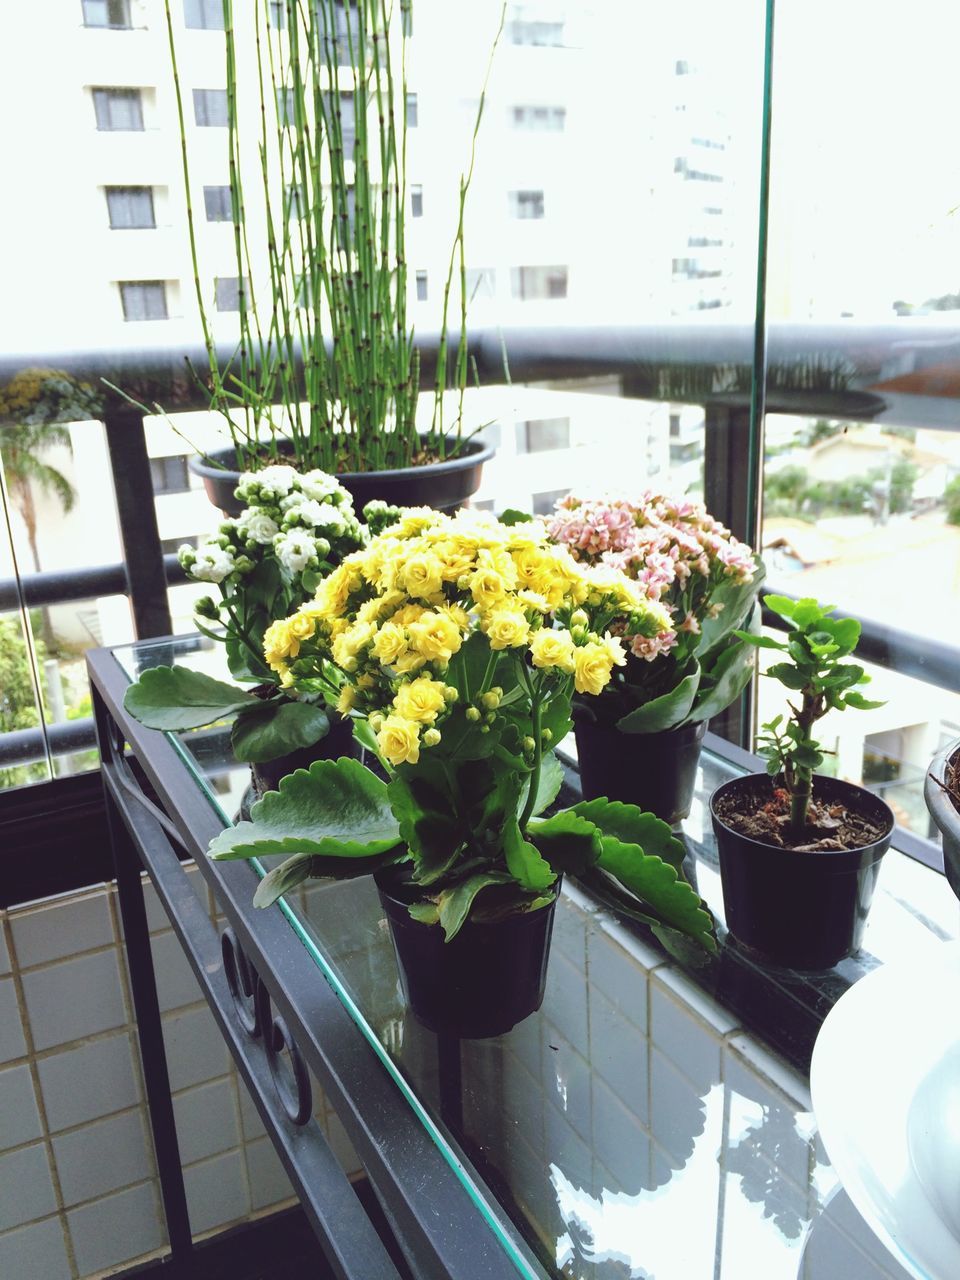 potted plant, flower, indoors, window, growth, plant, freshness, glass - material, table, architecture, balcony, built structure, chair, flower pot, vase, transparent, building exterior, leaf, day, fragility